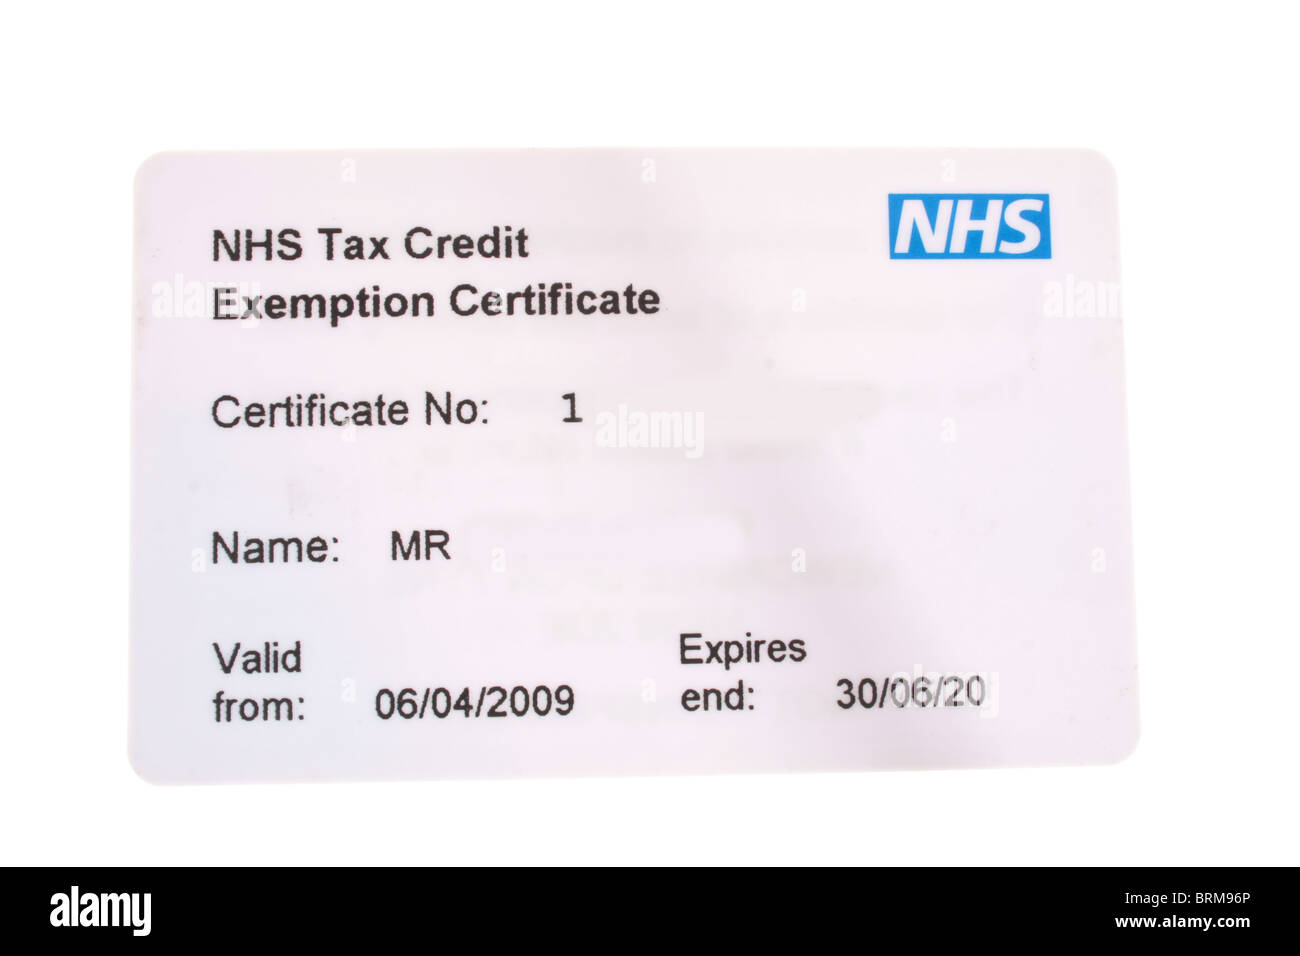 close-up-of-white-plastic-nhs-tax-credit-exemption-certificate-card